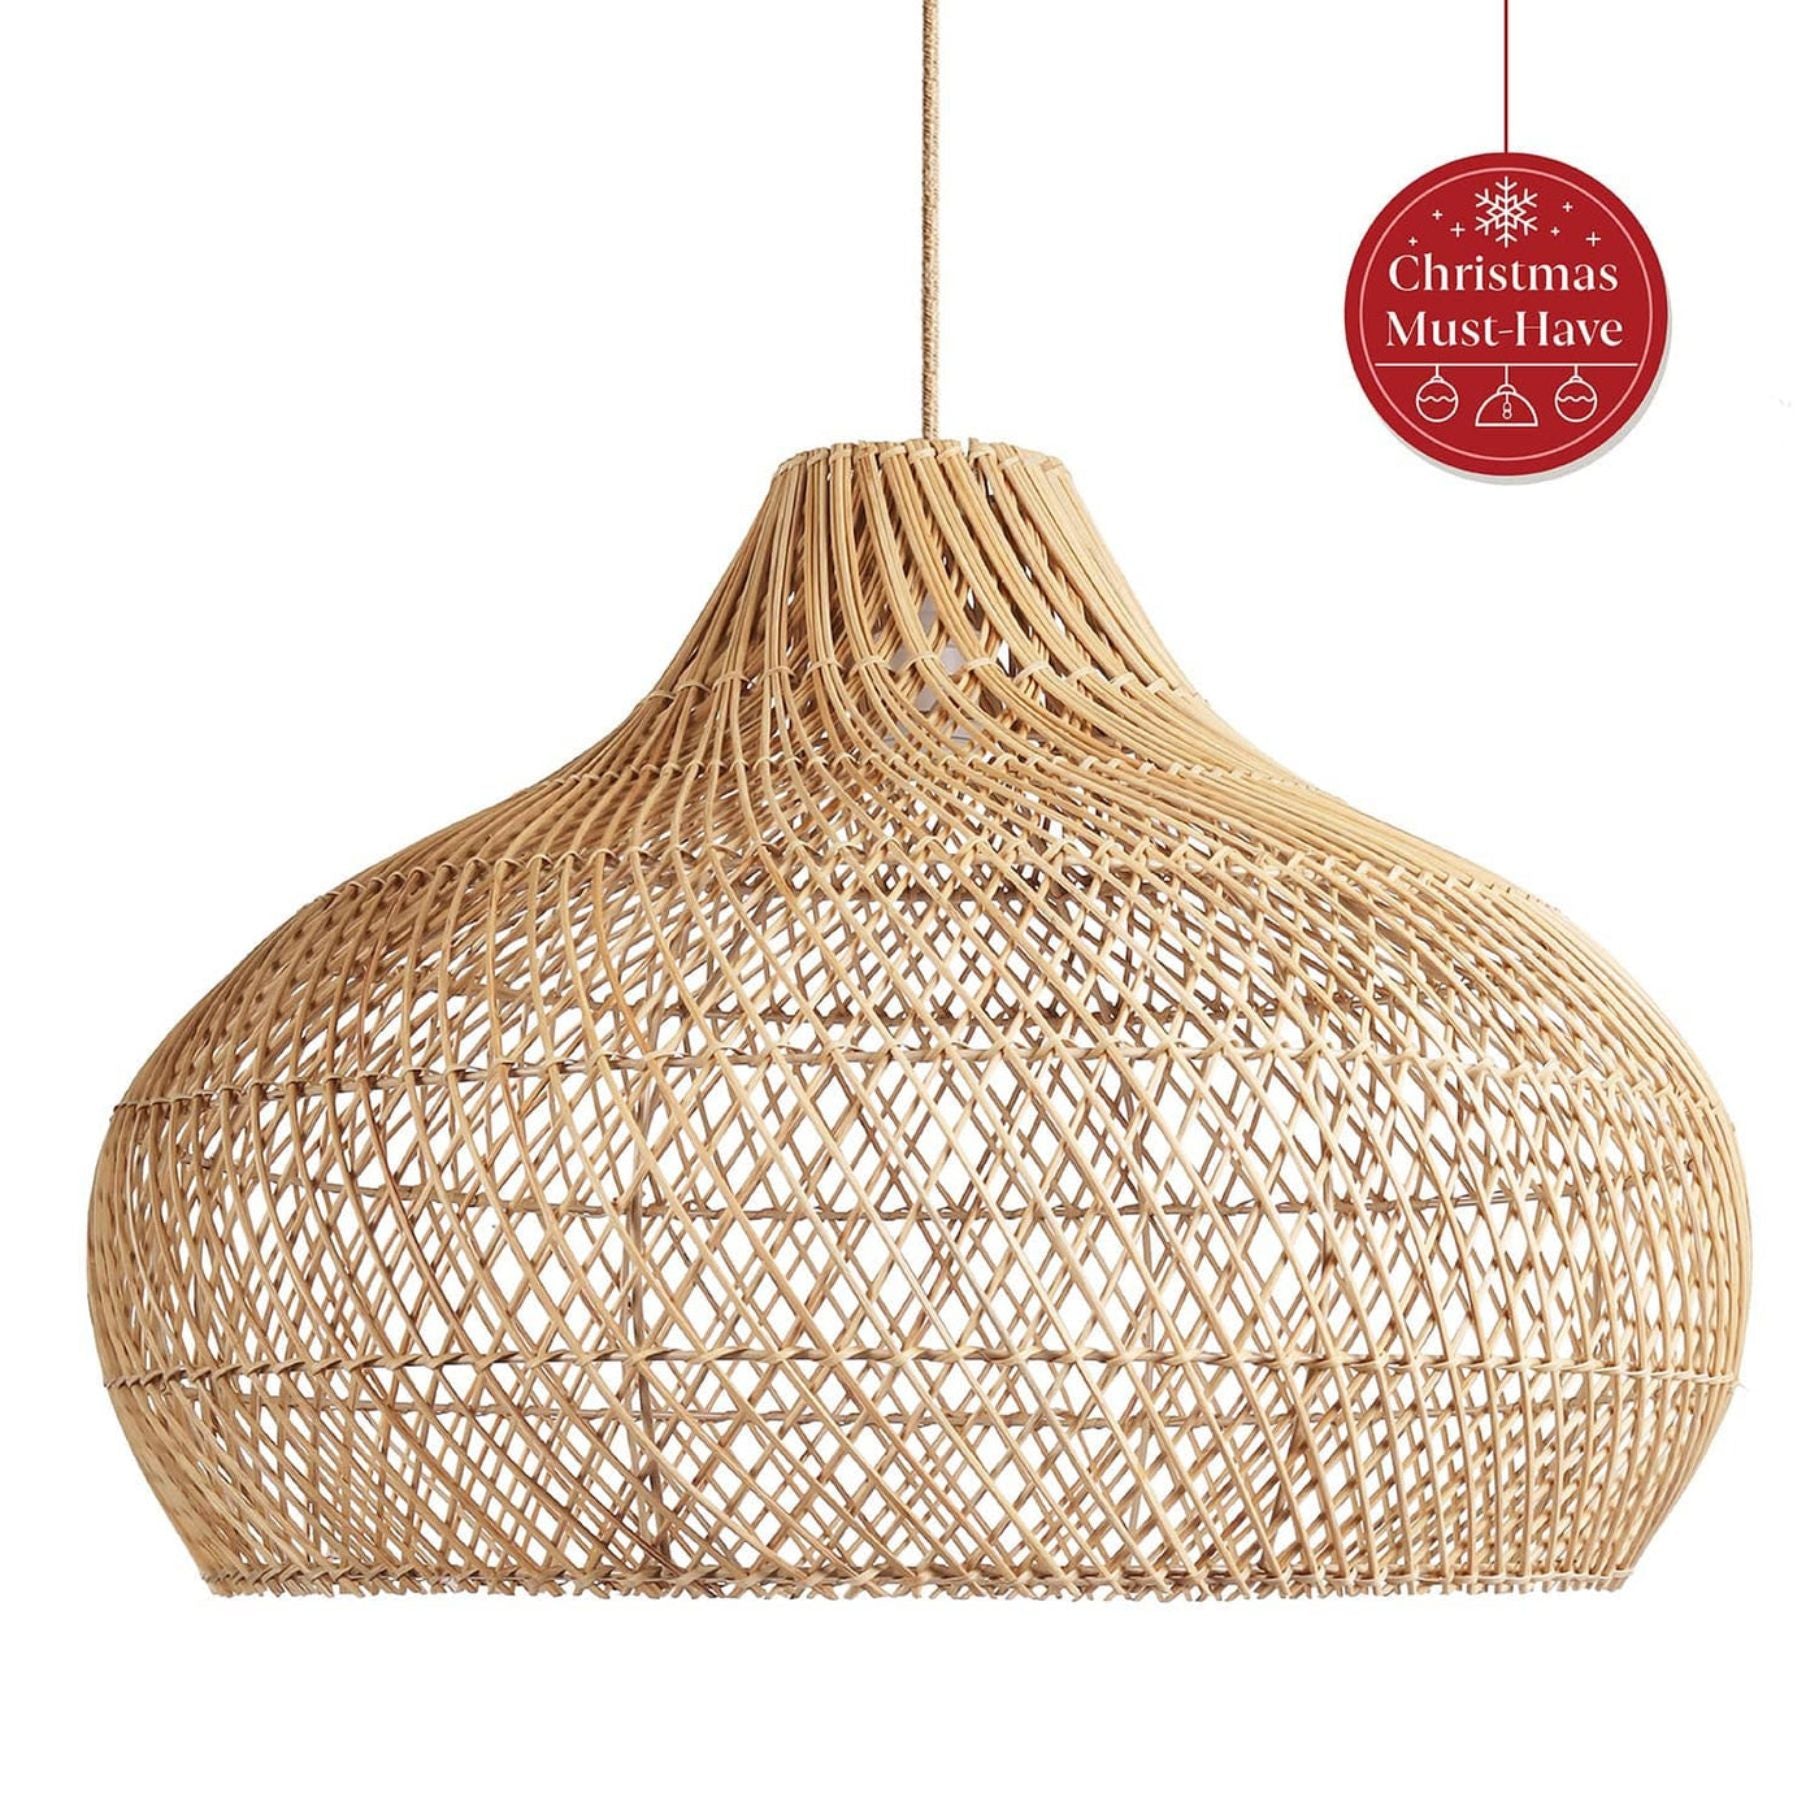 the kloe rattan pendant lamp creates a captivating light that envelops the entire room in a warm and inviting atmosphere